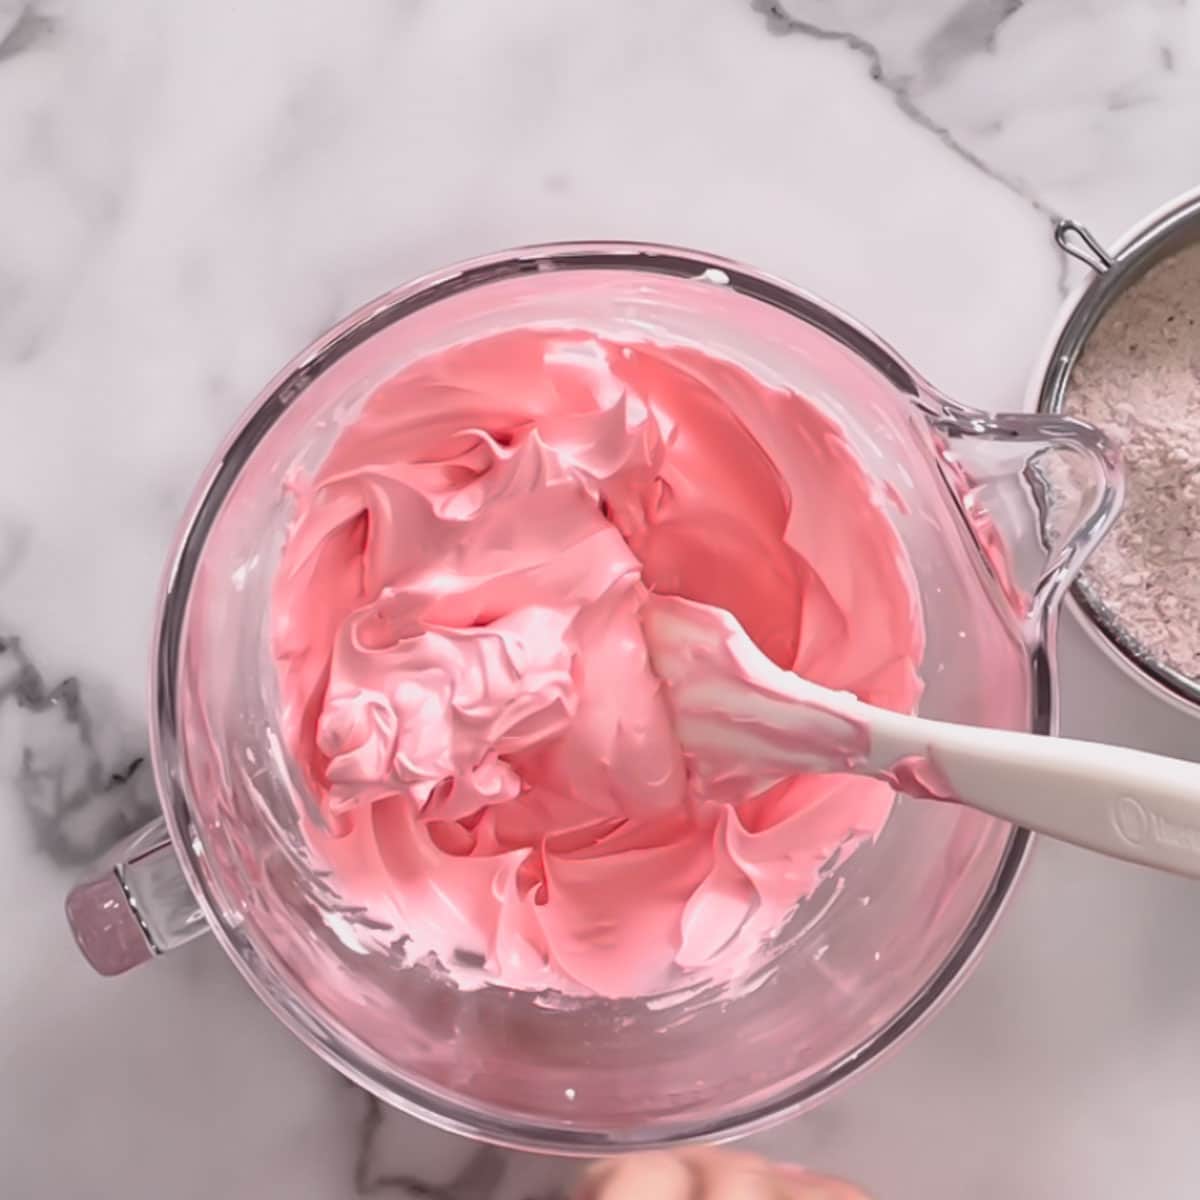 A glass bowl of pink meringue.